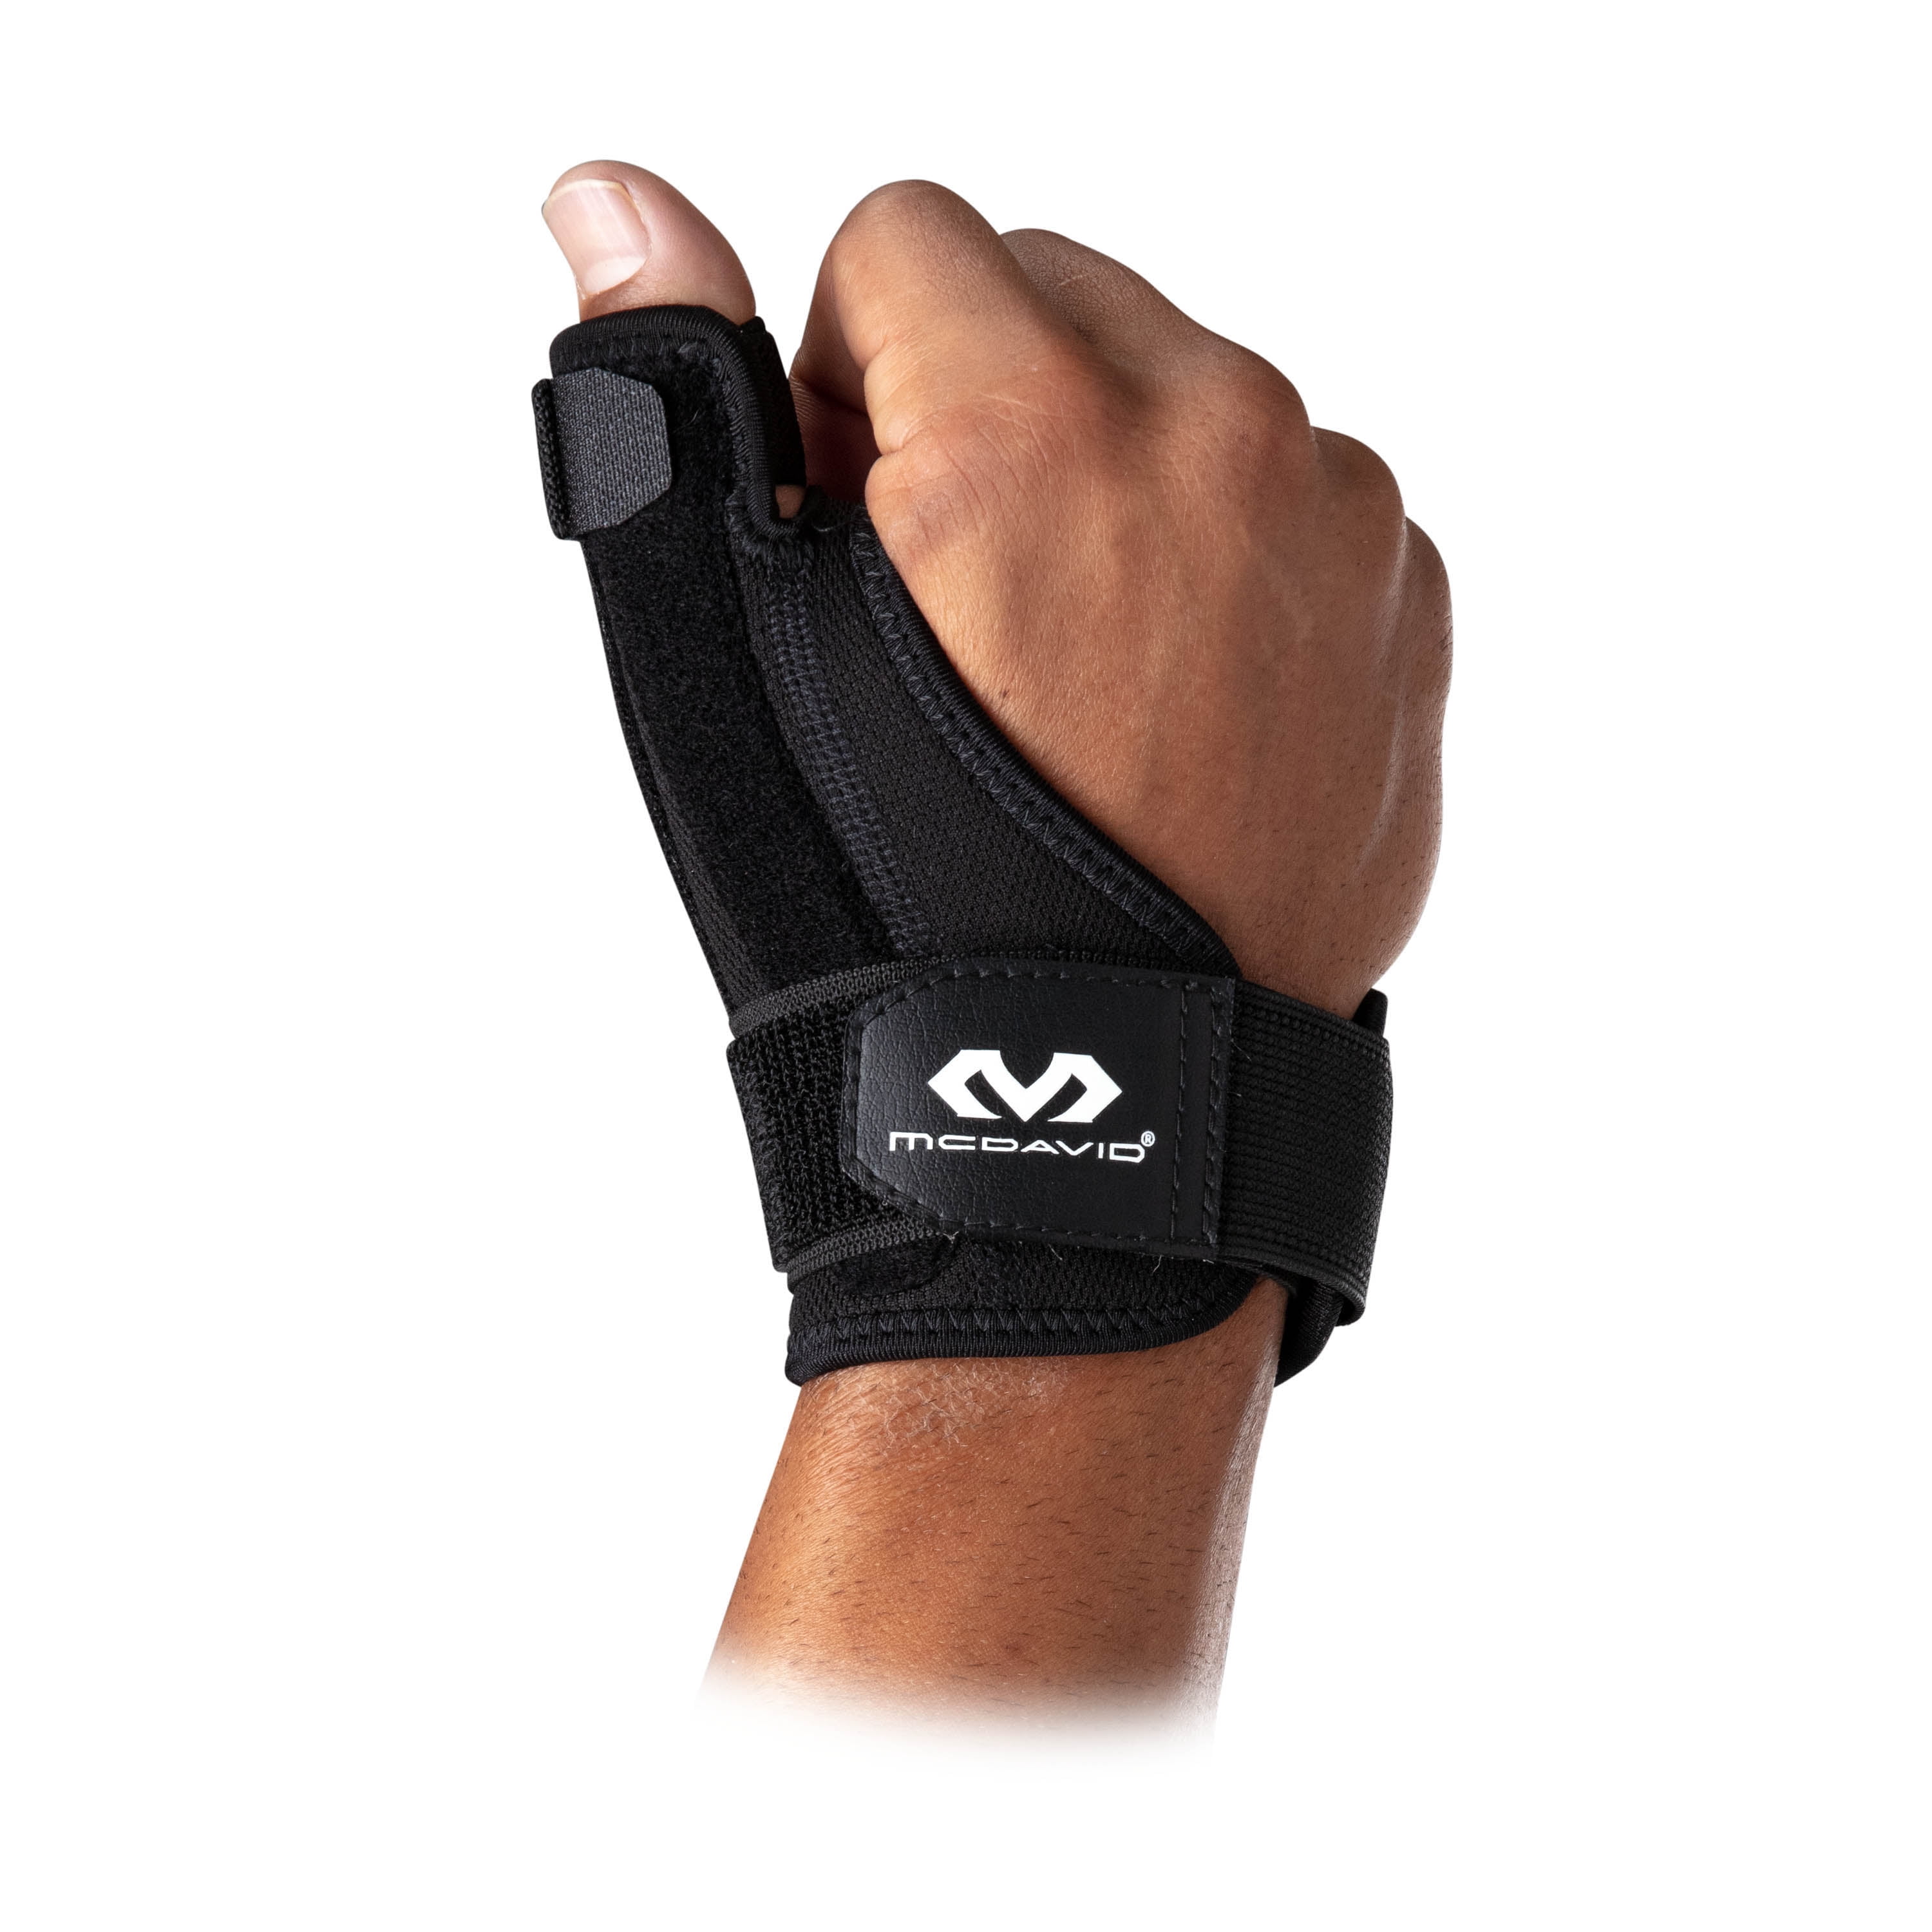 McDavid Sport Injury and Pain Relief Compression Adjustable Thumb Stabilizer, Large/Extra-Large